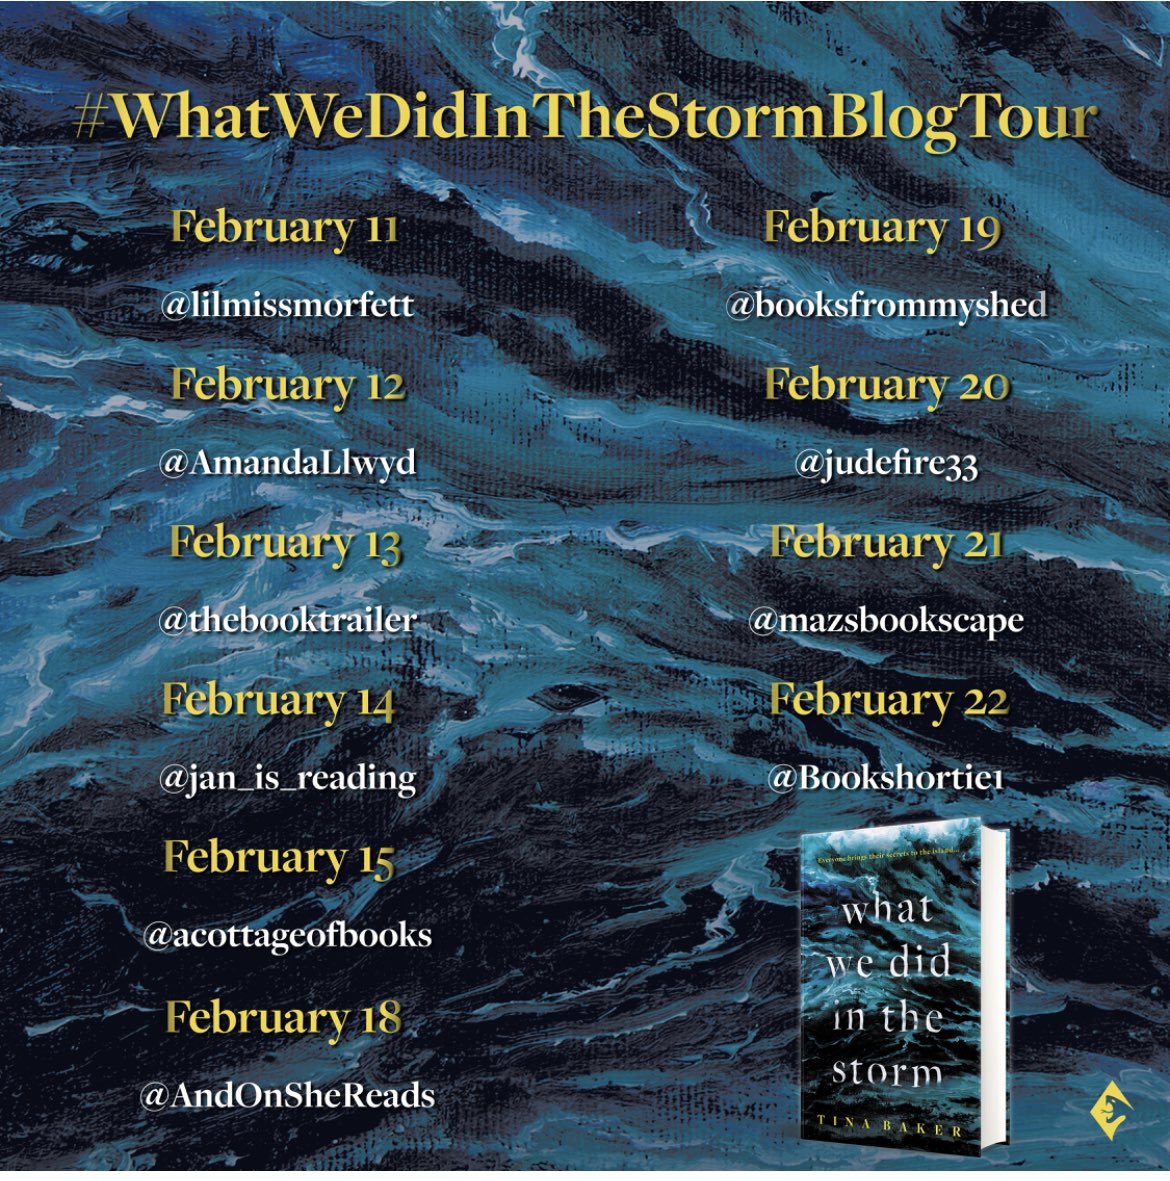 🌊 📚 BLOG TOUR 📚🌊

It’s my stop on the Blog Tour for the very excellent new book from @TinaBakerBooks 

#WhatWeDidInTheStorm  

Due out 15/2/24 

Huge thanks @ViperBooks for letting me join the tour.

#WhatWeDidInTheStormBlogTour 
#BookBlogger

twoheadsarebetterthanone.home.blog/2024/02/14/wha…